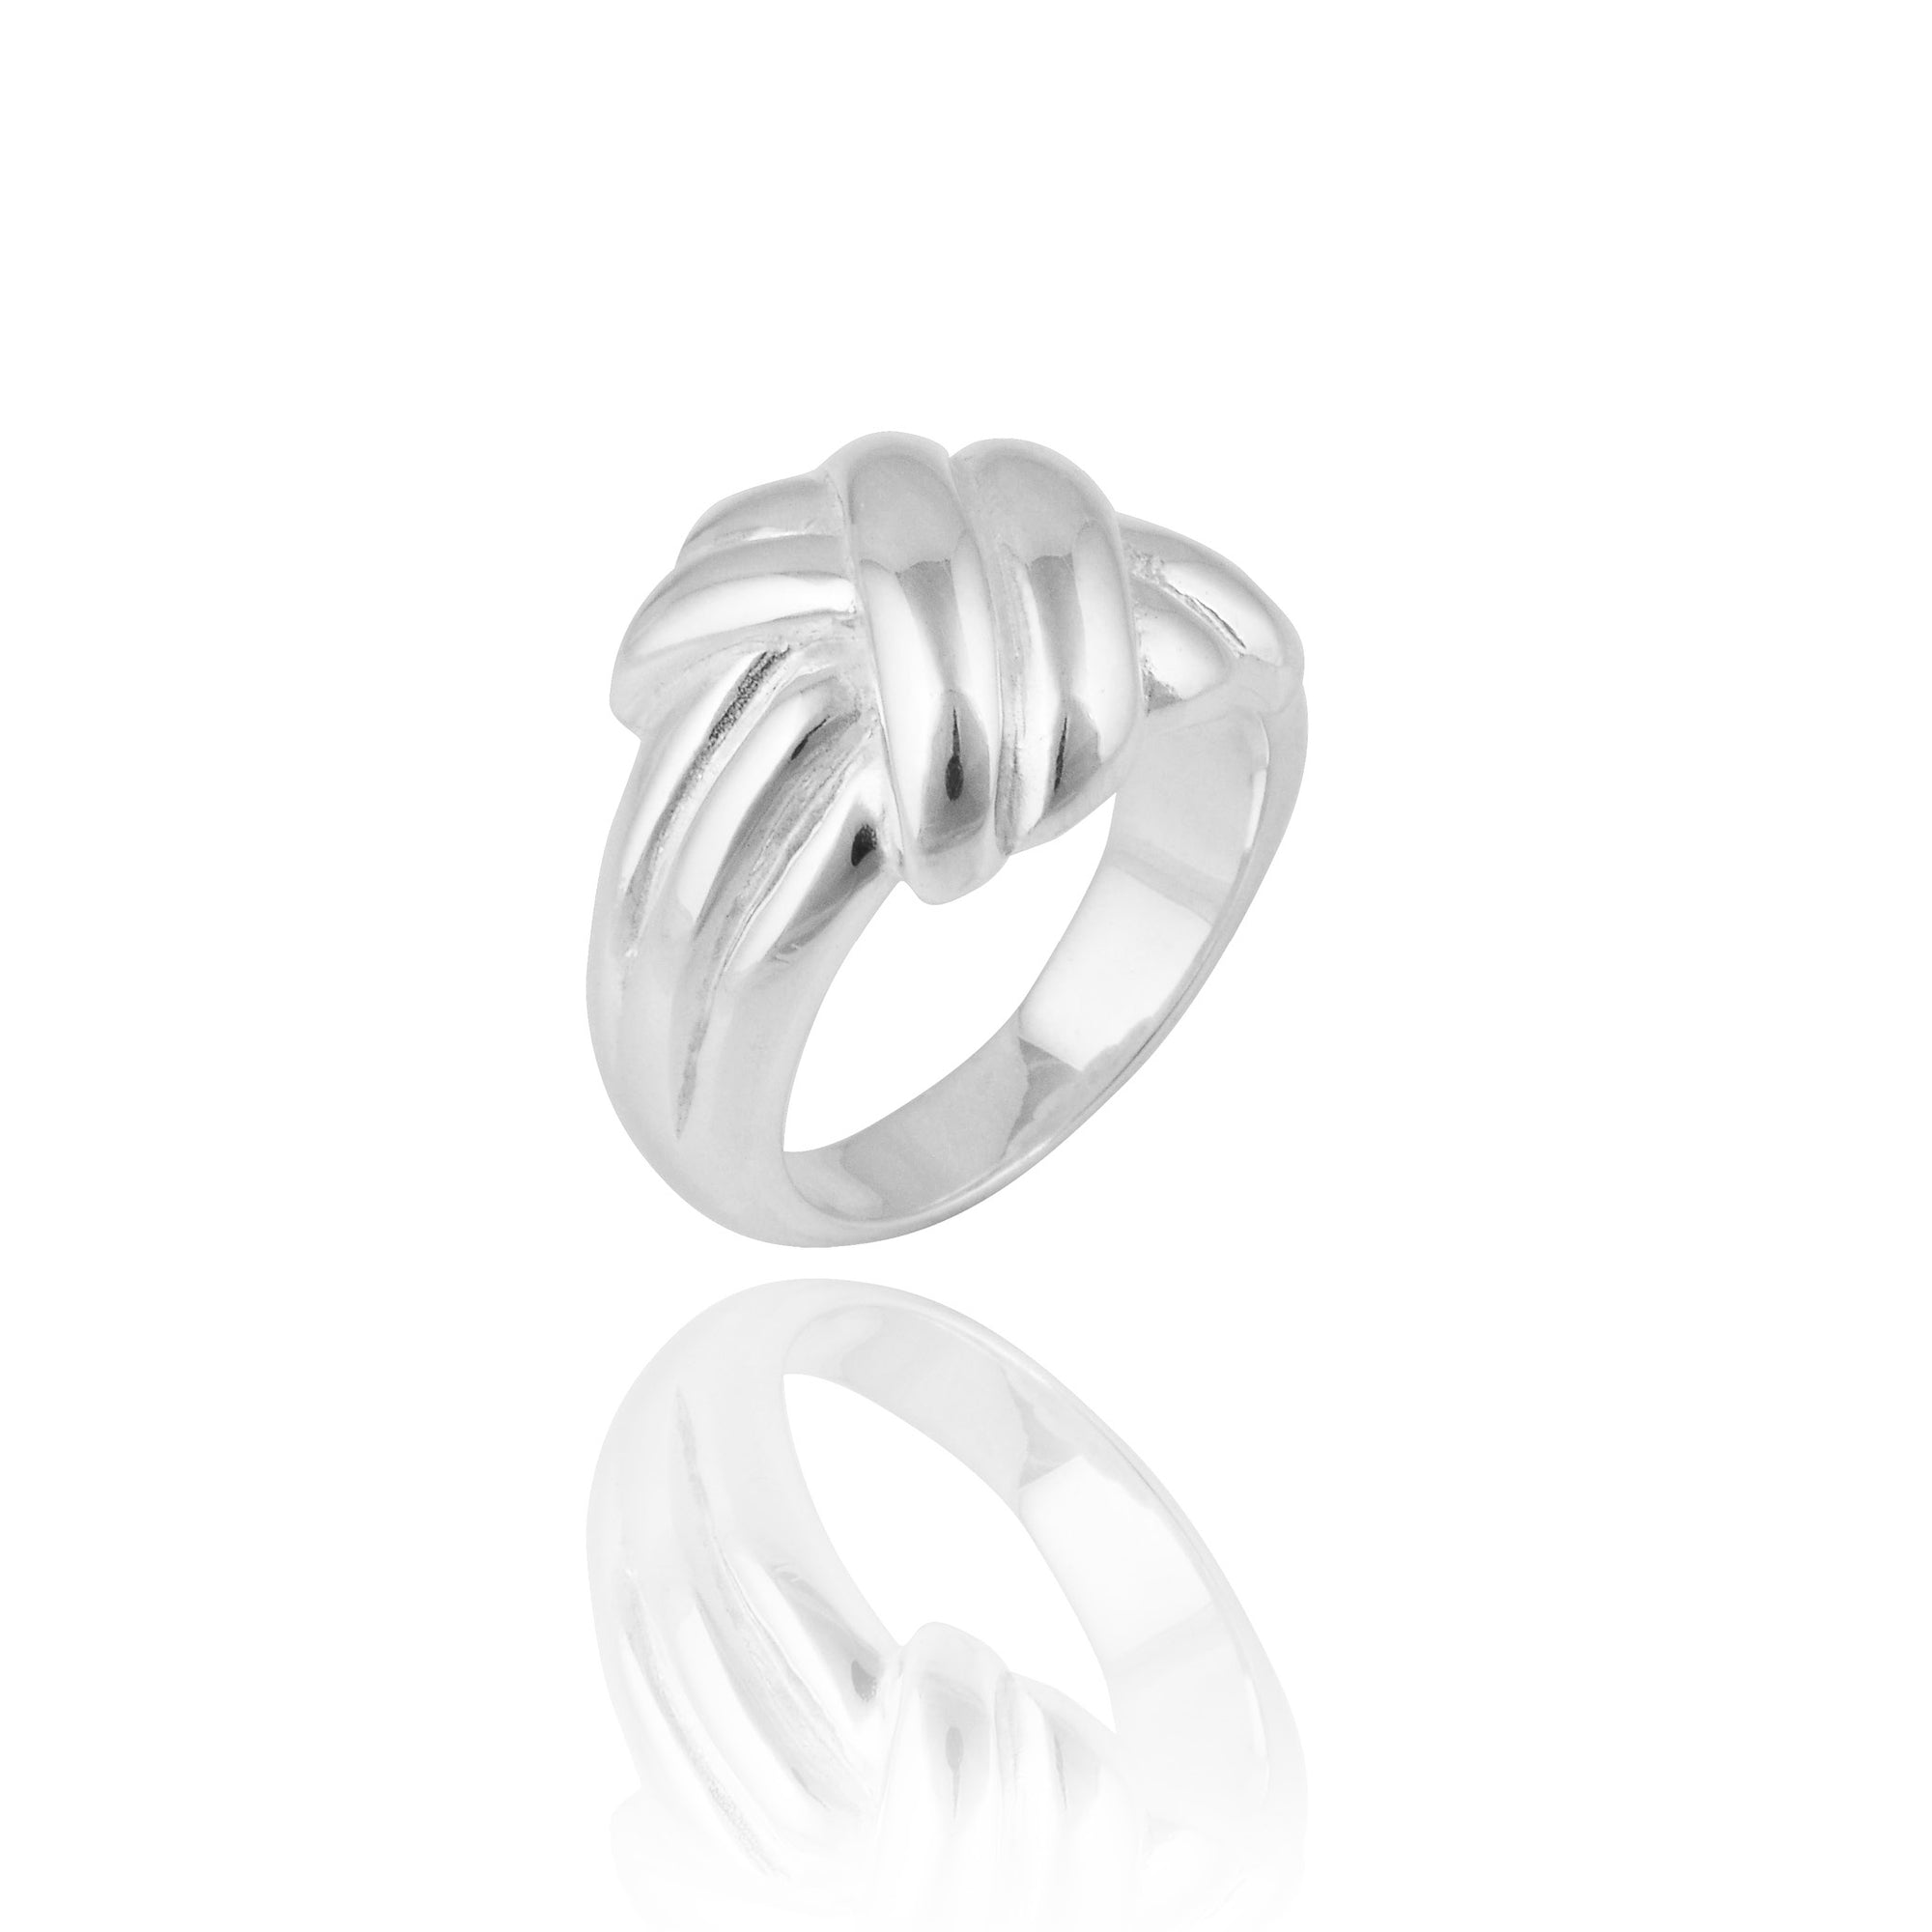 Sustainable jewellery Tina Turner Plaited Ring - Silver